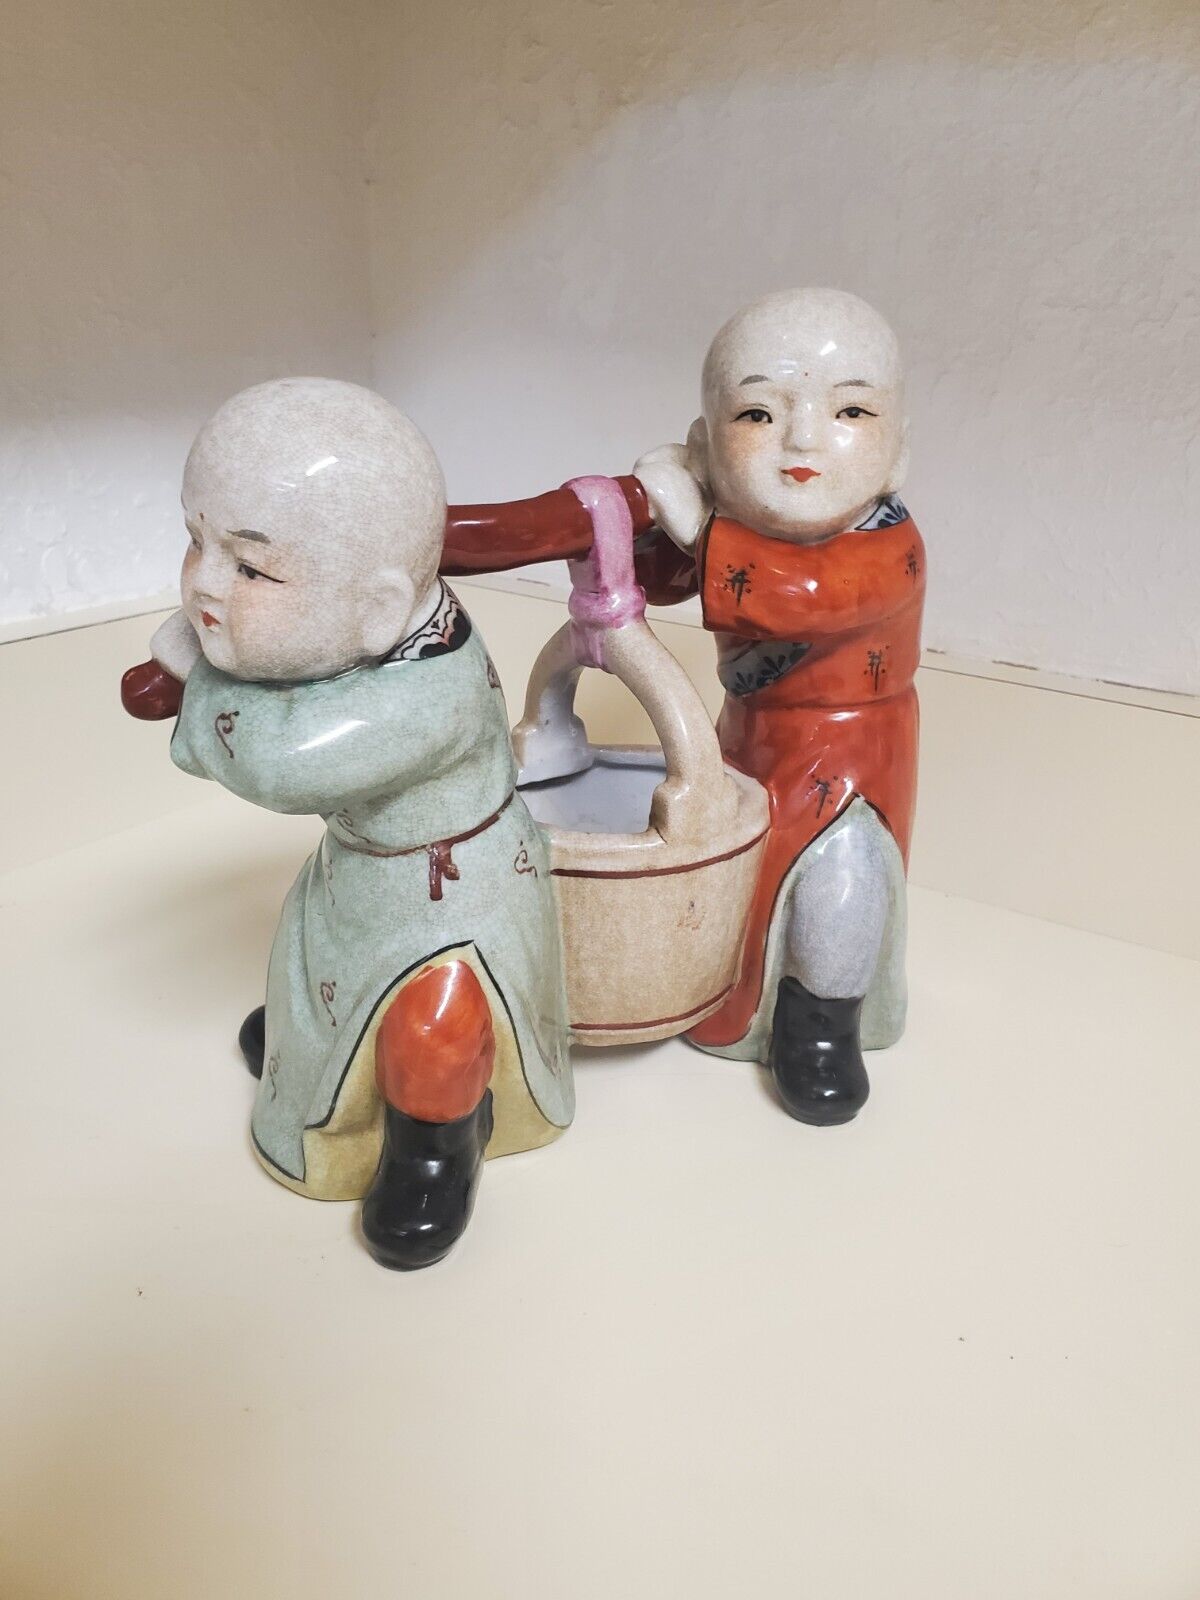 Porcelain Chinese Vintage Asian Figure Statue Pottery Boys Carrying Water Pail